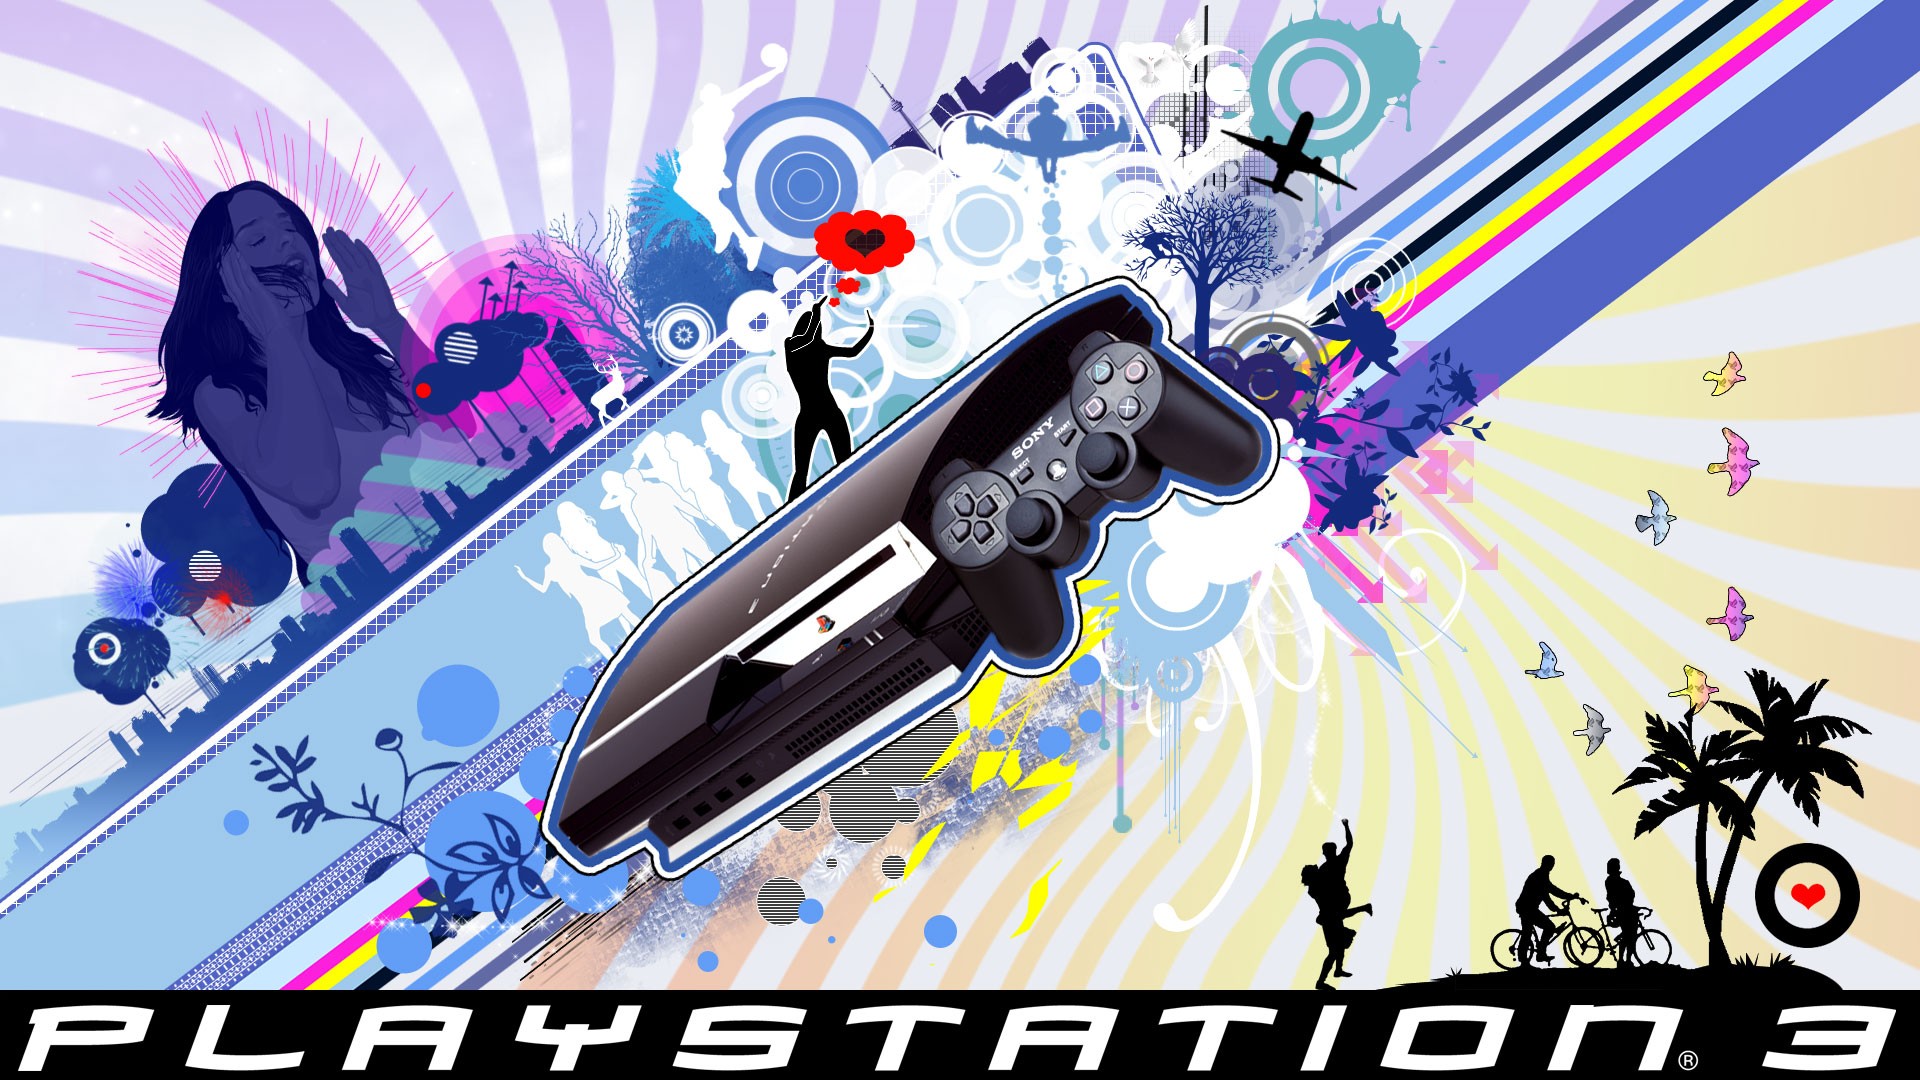 Free Ps3 themes Wallpapers, Backgrounds, Images, Art Photos